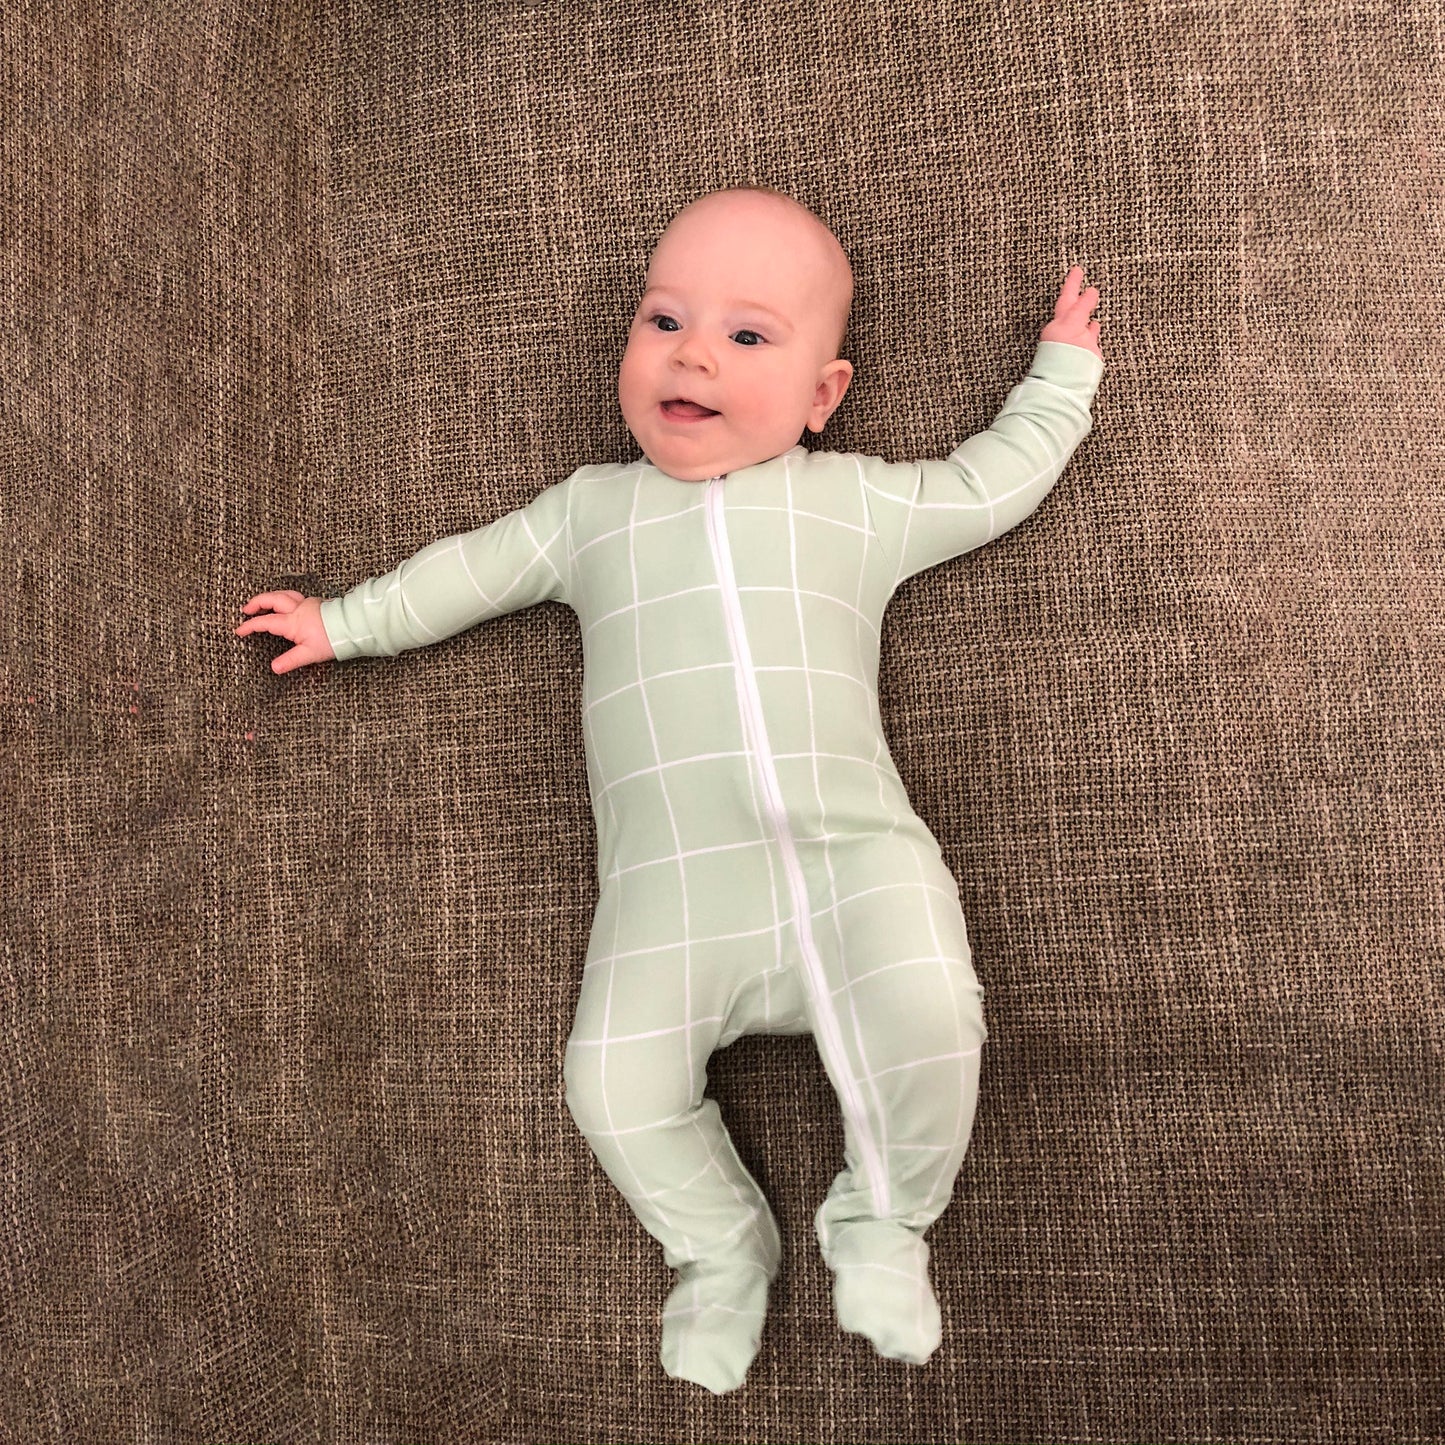 Zipped Footed Coverall Pattern